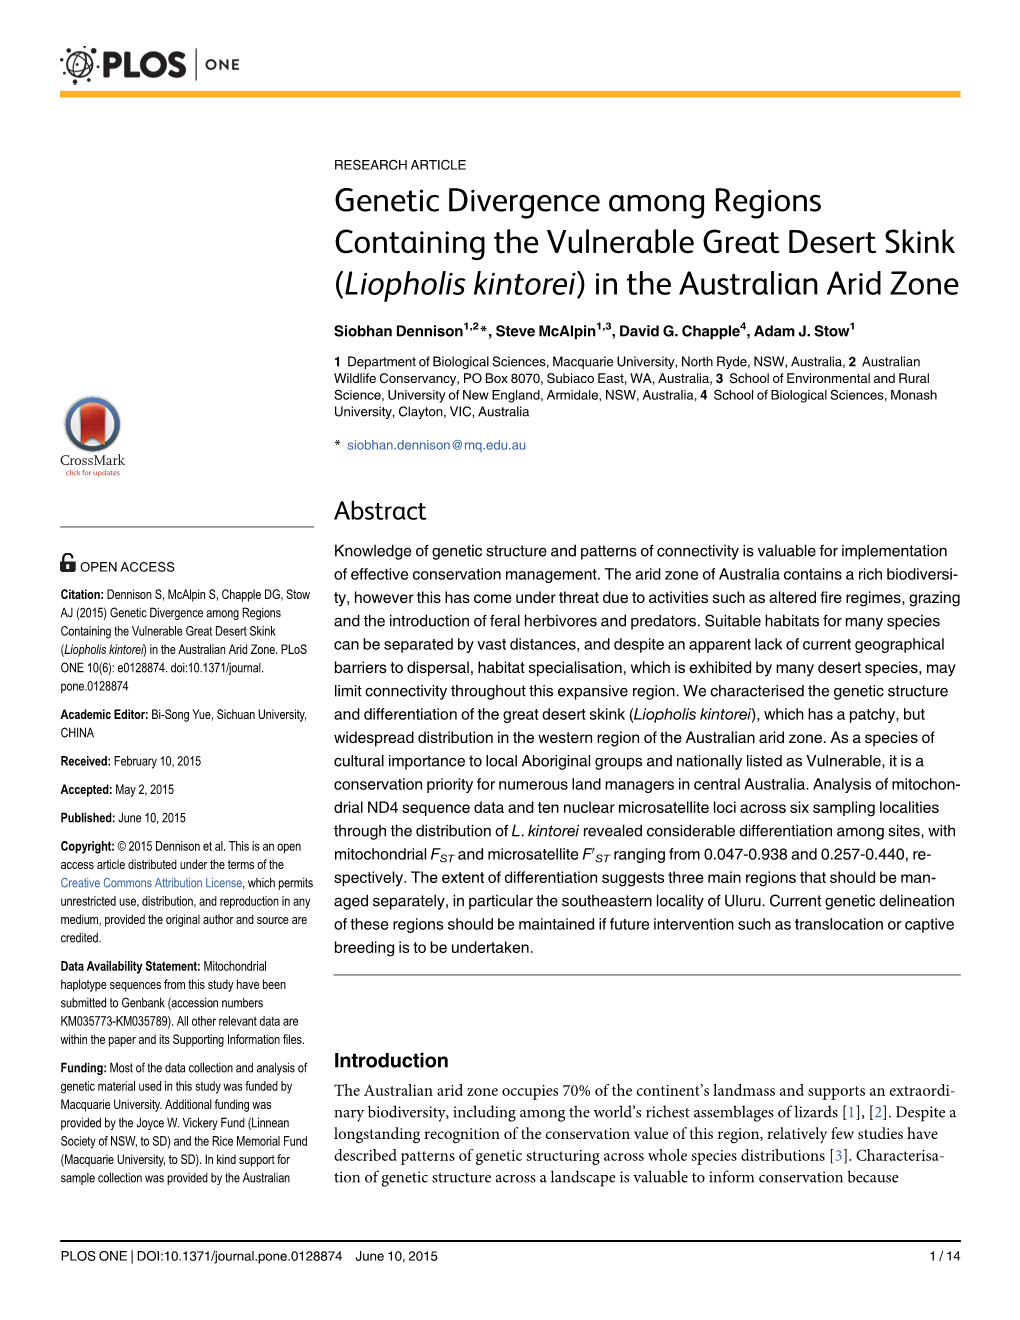 Genetic Divergence Among Regions Containing the Vulnerable Great Desert Skink (Liopholis Kintorei) in the Australian Arid Zone